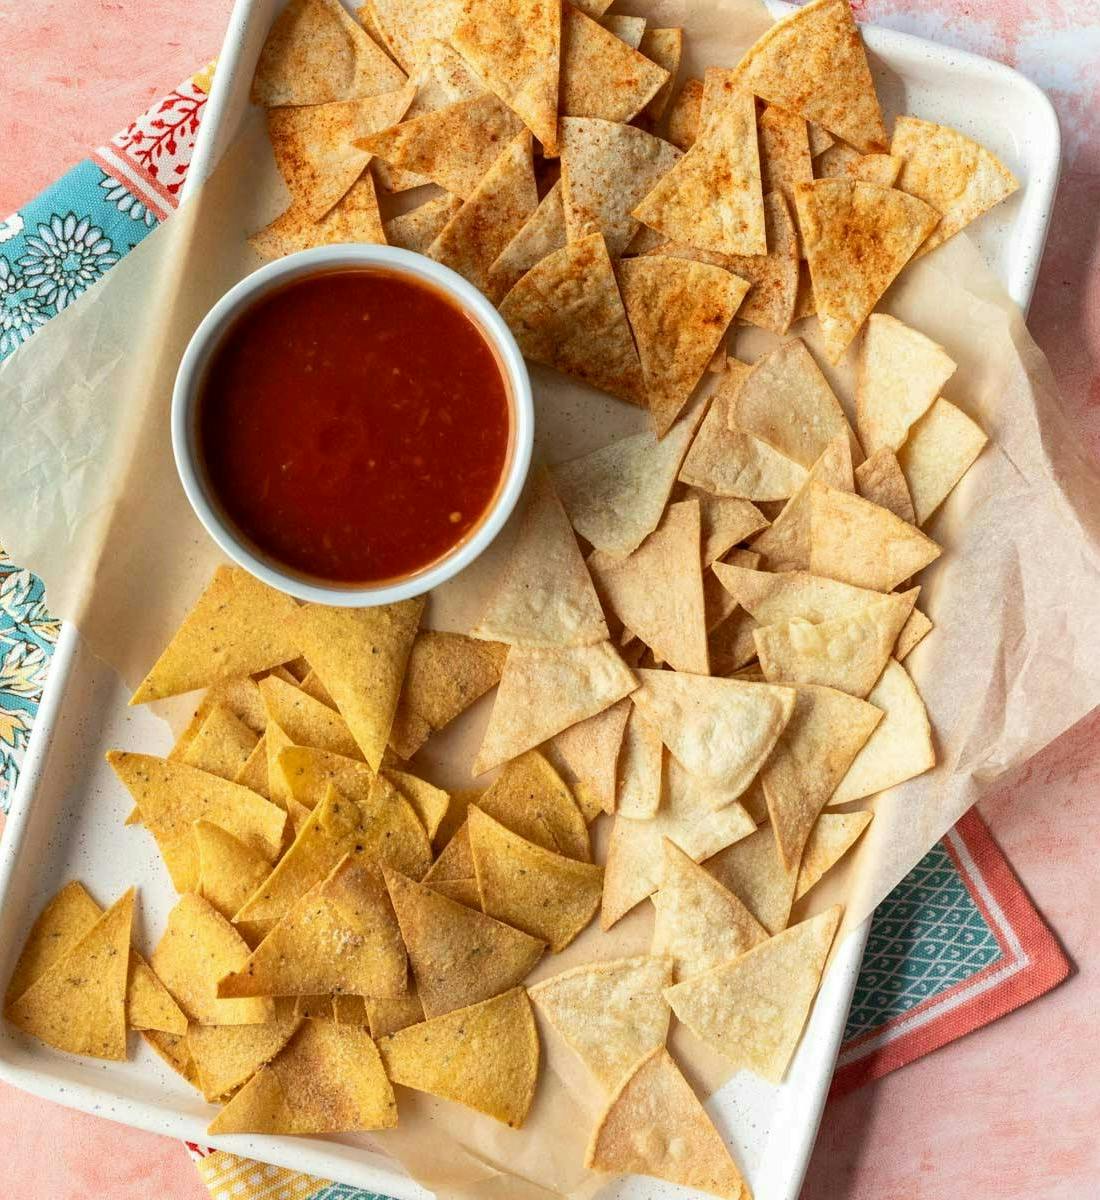 Baked and air fried tortilla chips spread out on a tray next to a cup of salsa.